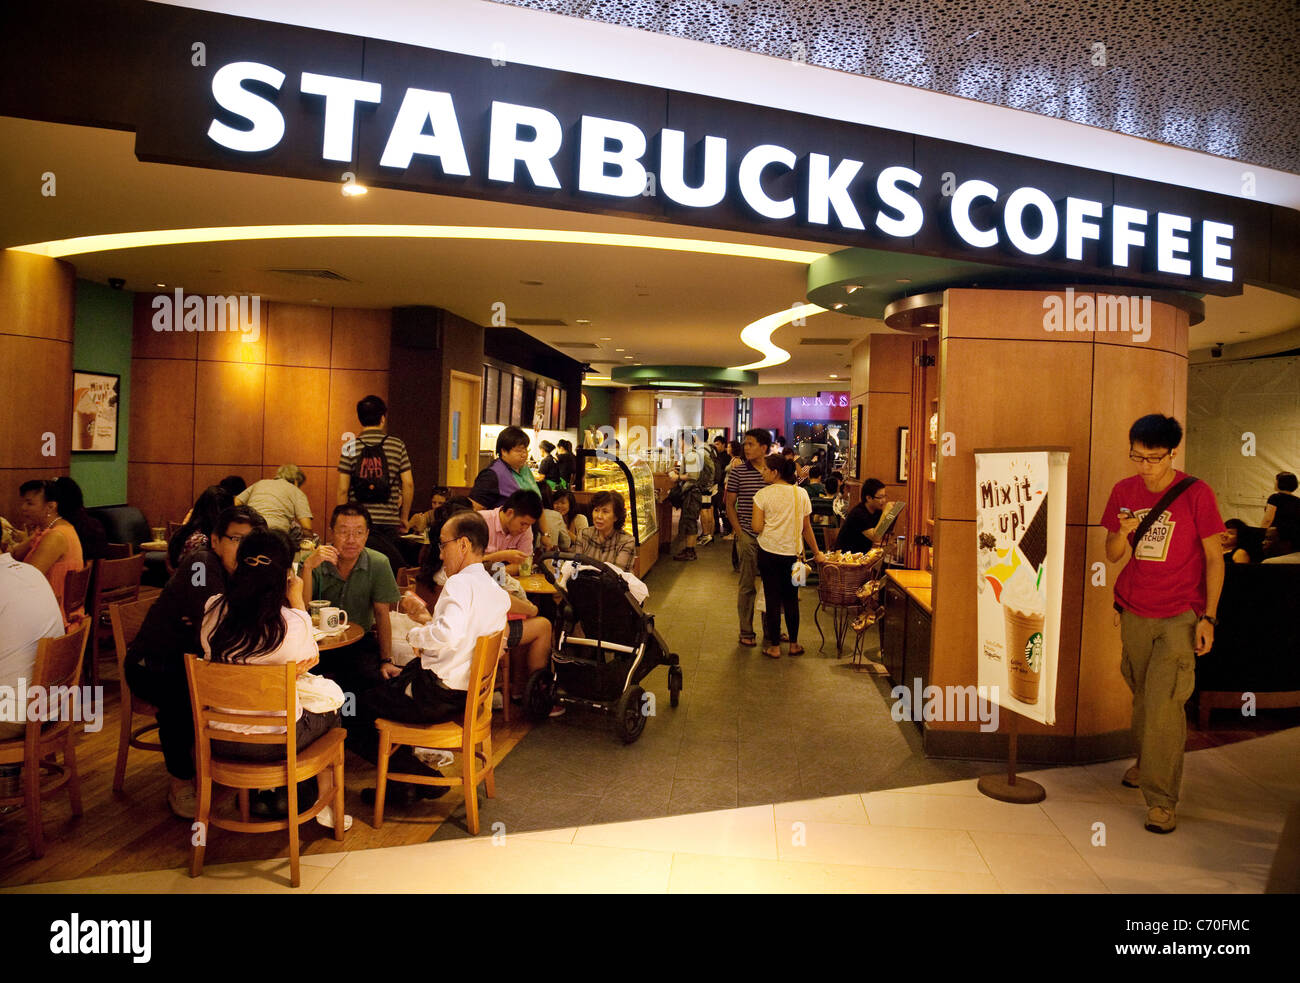 Starbucks Coffee Bar, Ion shopping mall, Singapour Banque D'Images